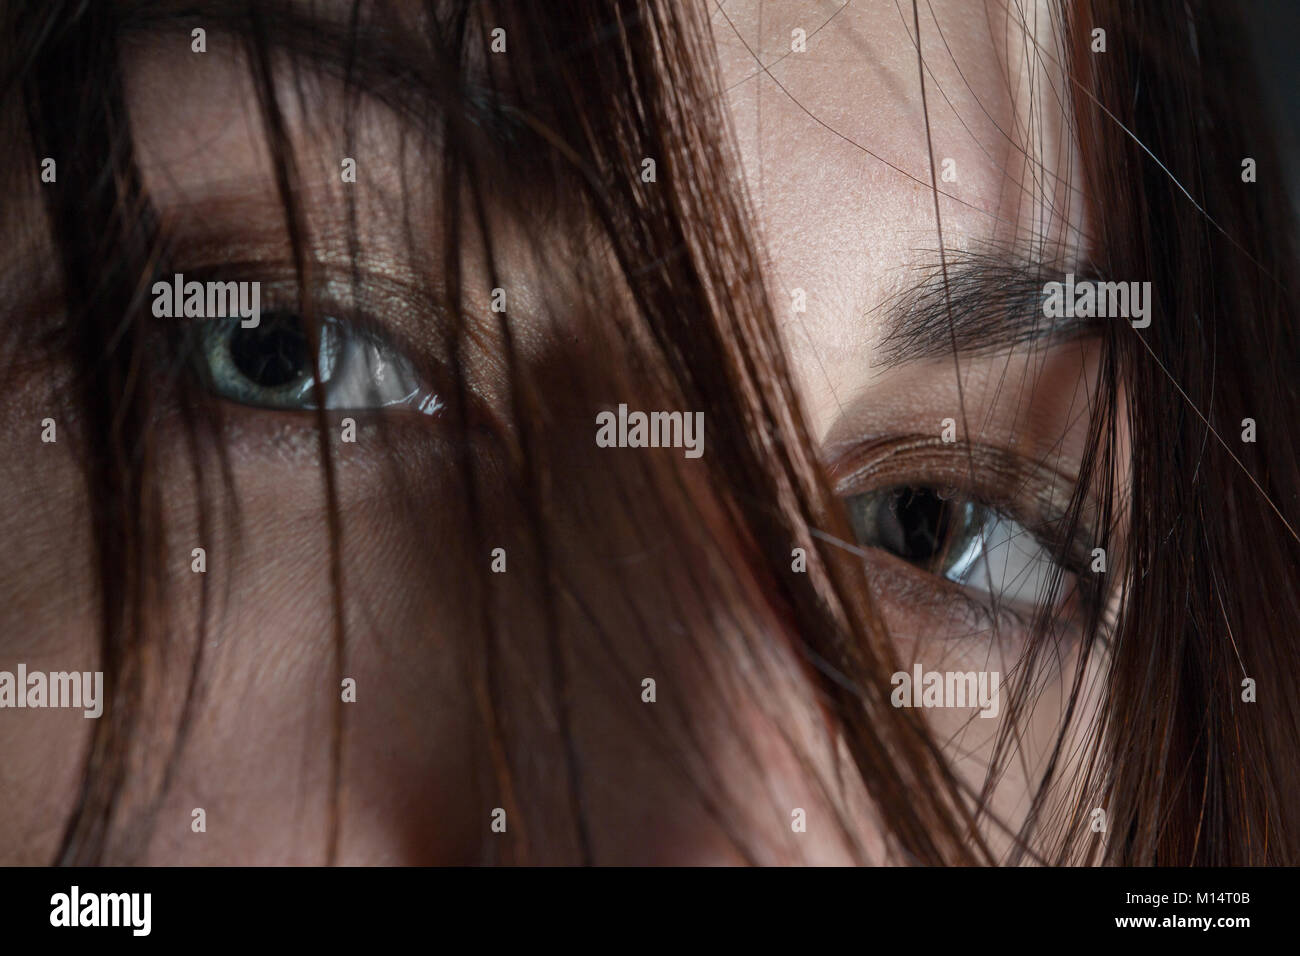 stared female eyes under blowing hair close up Stock Photo